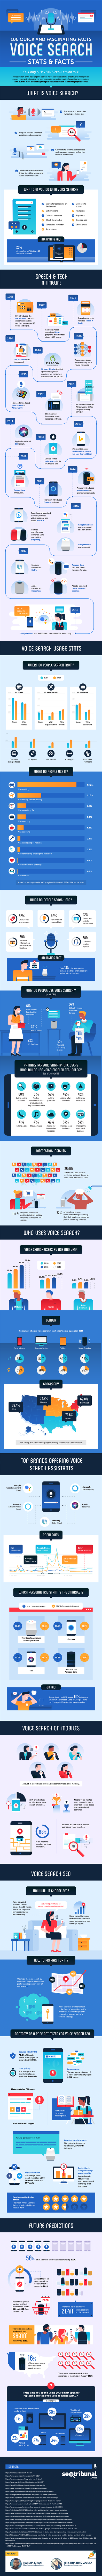 https://sherpa2017.blob.core.windows.net/images/contenthub-posts/07-2018/July-31---Voice-Search---Infographic.png